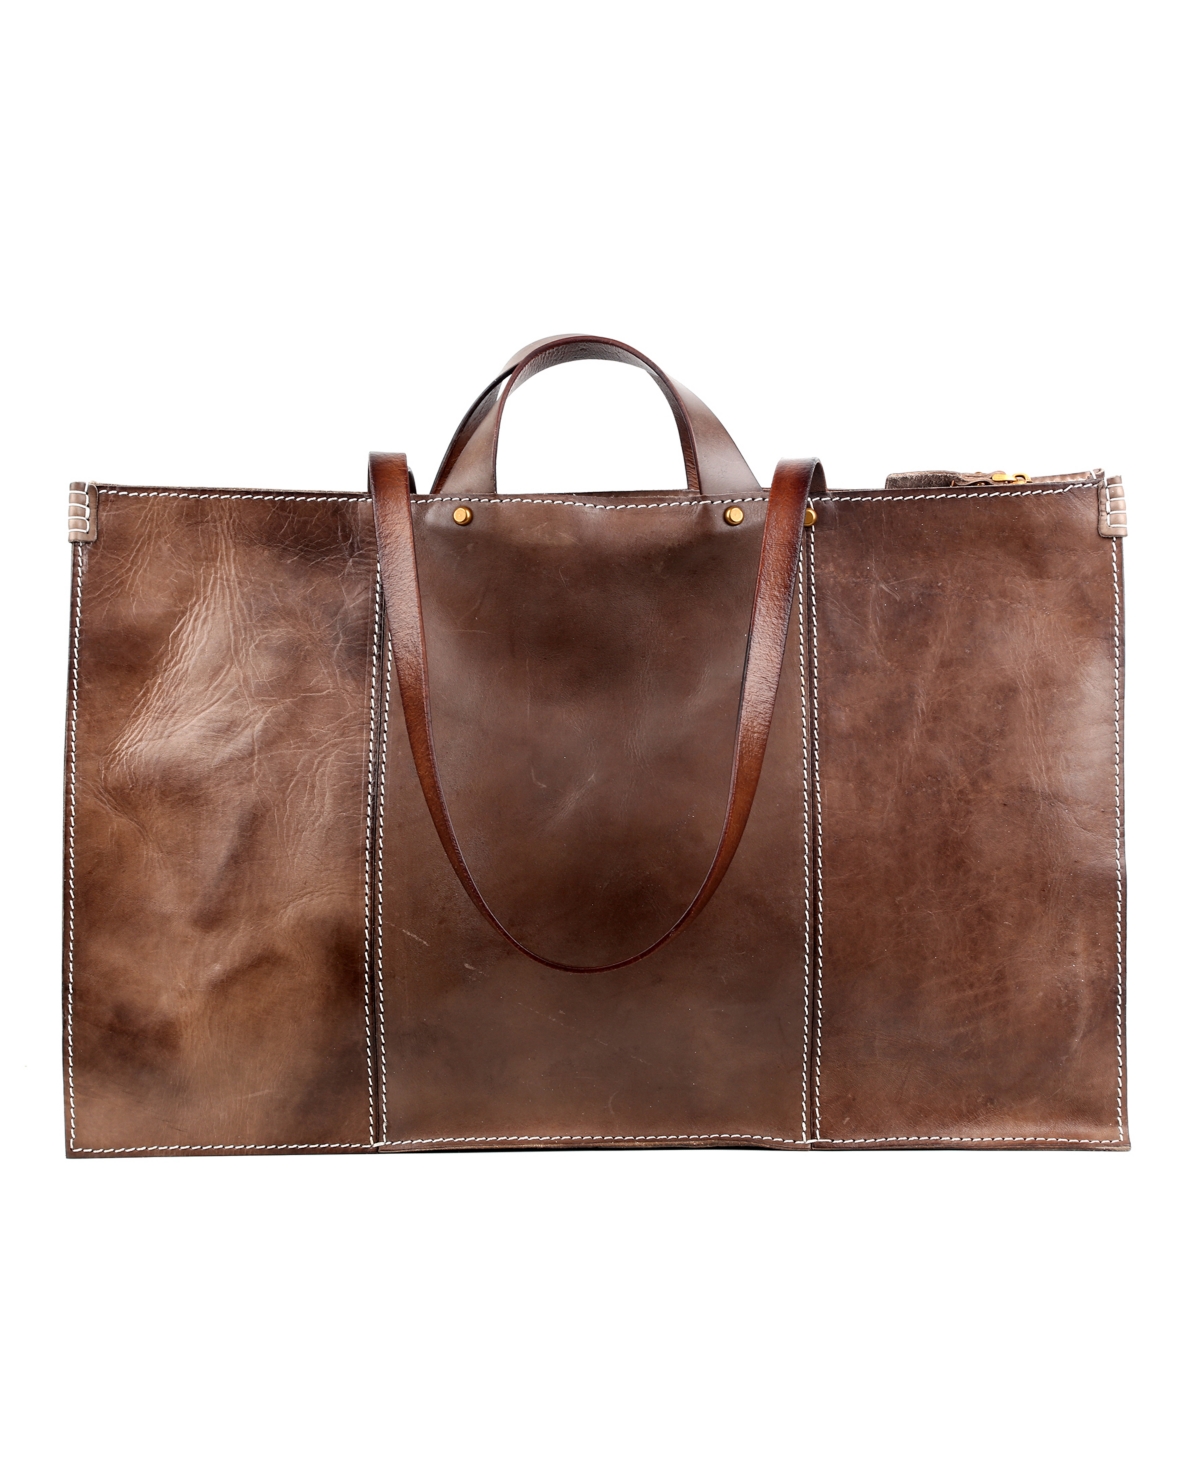 Women's Genuine Leather Sandstorm Tote Bag - Taupe